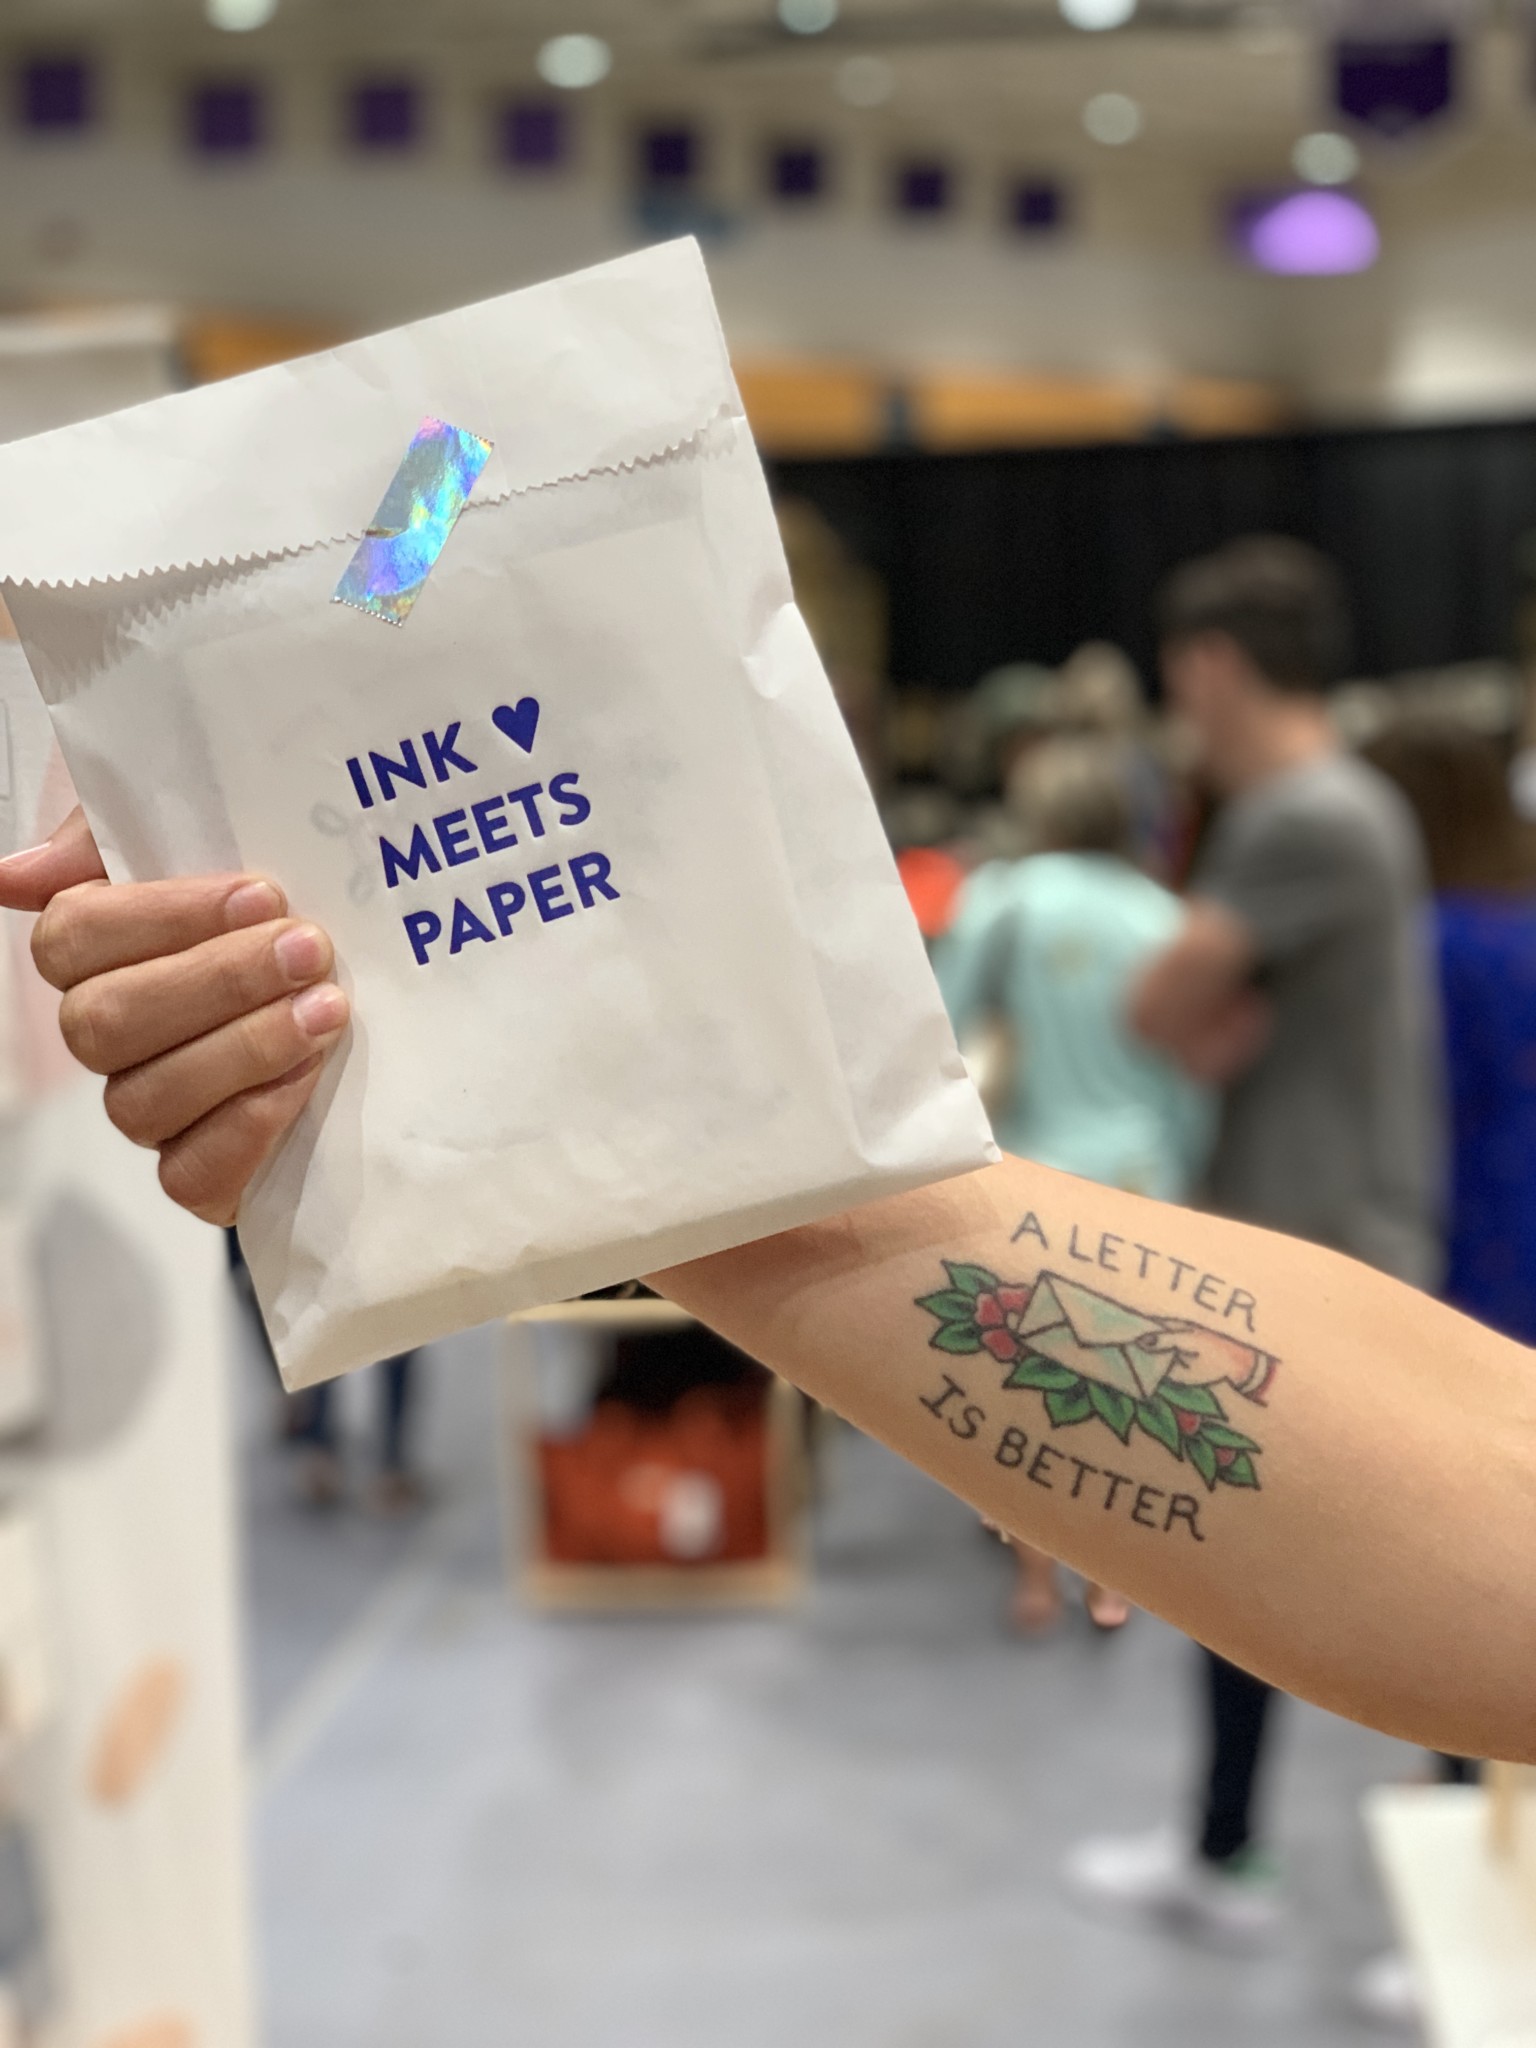 INK MEETS PAPER merchandise bag is held by a hand that shows the arm with a tattoo that depicting a letter held in a hand with the text "A Letter is Better"